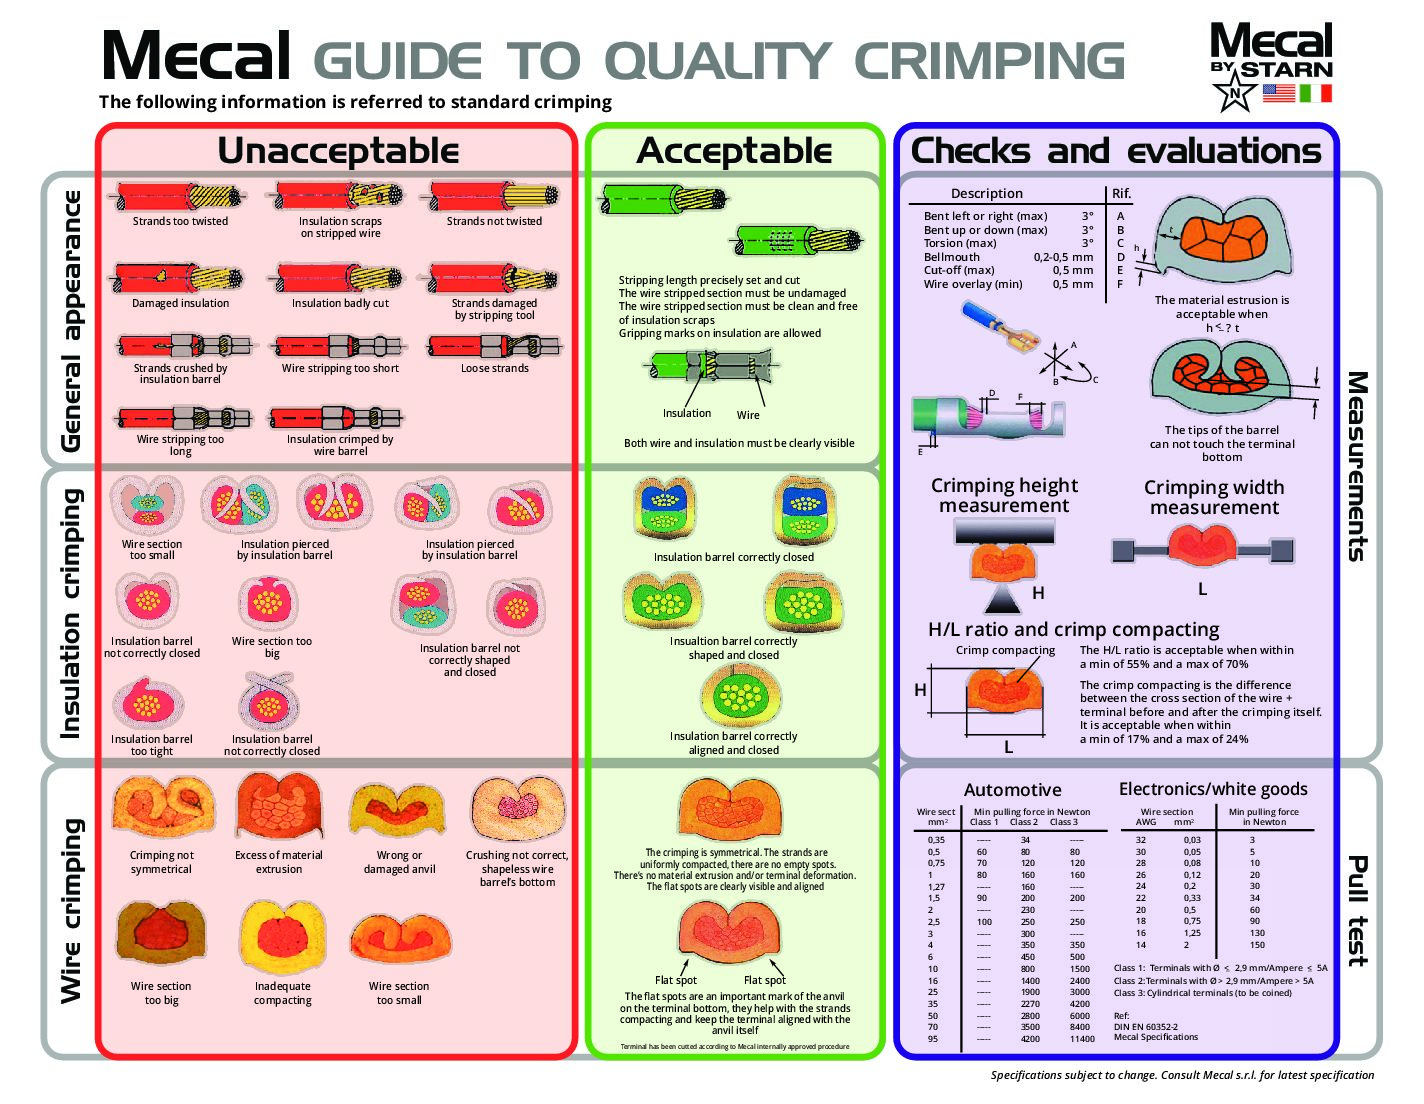 Guide to Quality Crimping